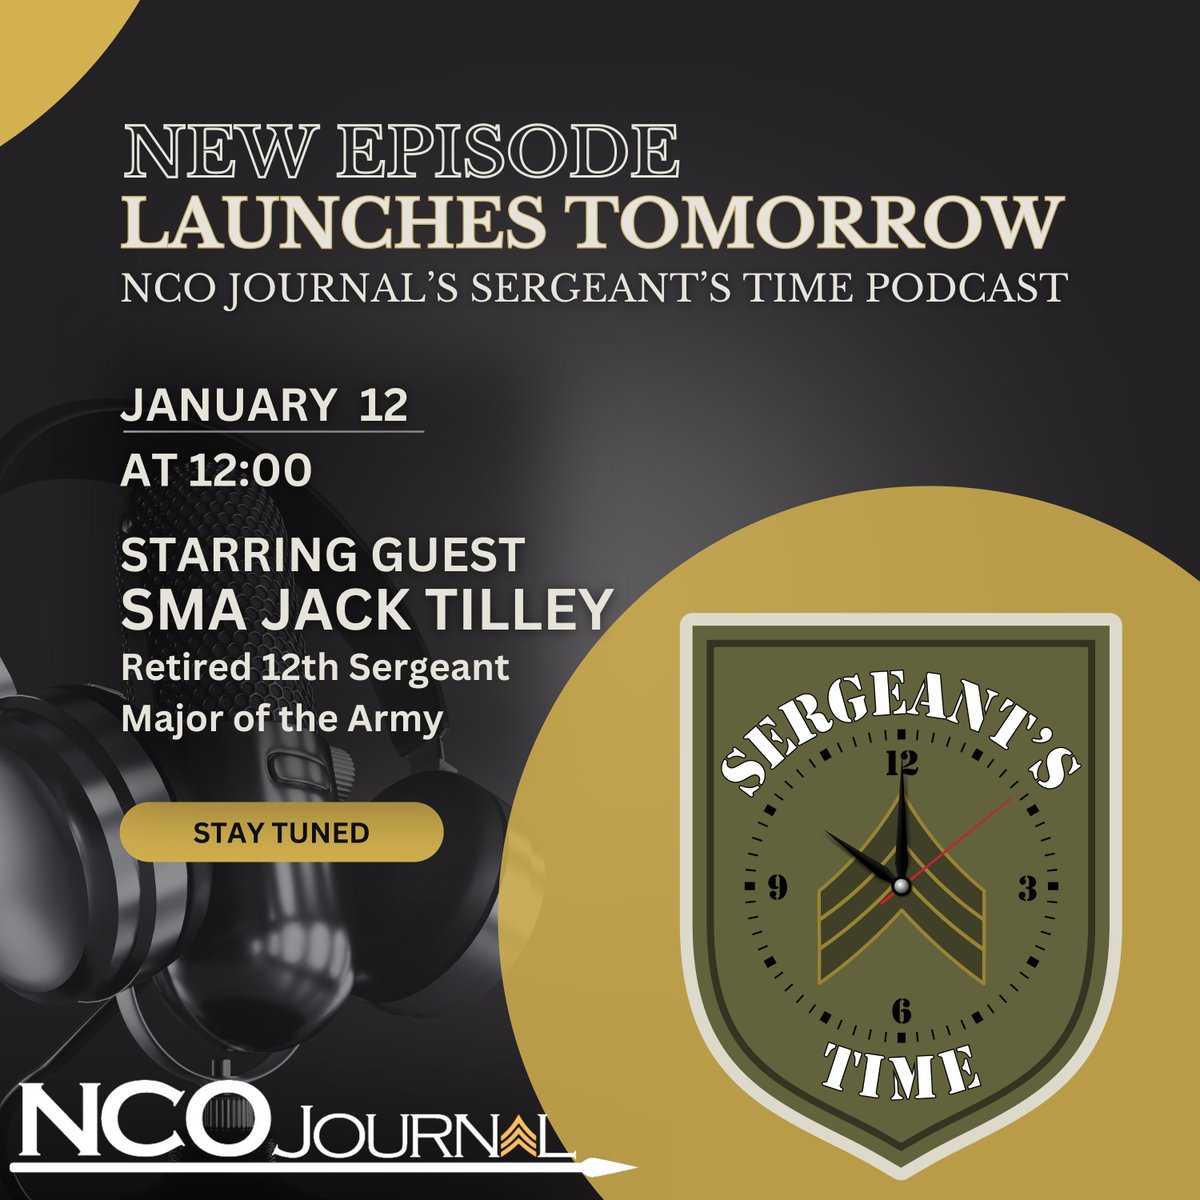 New Episode Alert: Sergeant’s Time Podcast Goes Up Tomorrow! 
Our guest, 12th SMA Jack Tilley, joins the NCO Journal team to dig deep on a conversation that offers you meaningful stories and helpful guidance. 
#NCOJSTP #SergeantsTime #SMATilley #12thSMA 
@USArmy @TRADOC @FORSCOM https://t.co/IuclvuFKJq